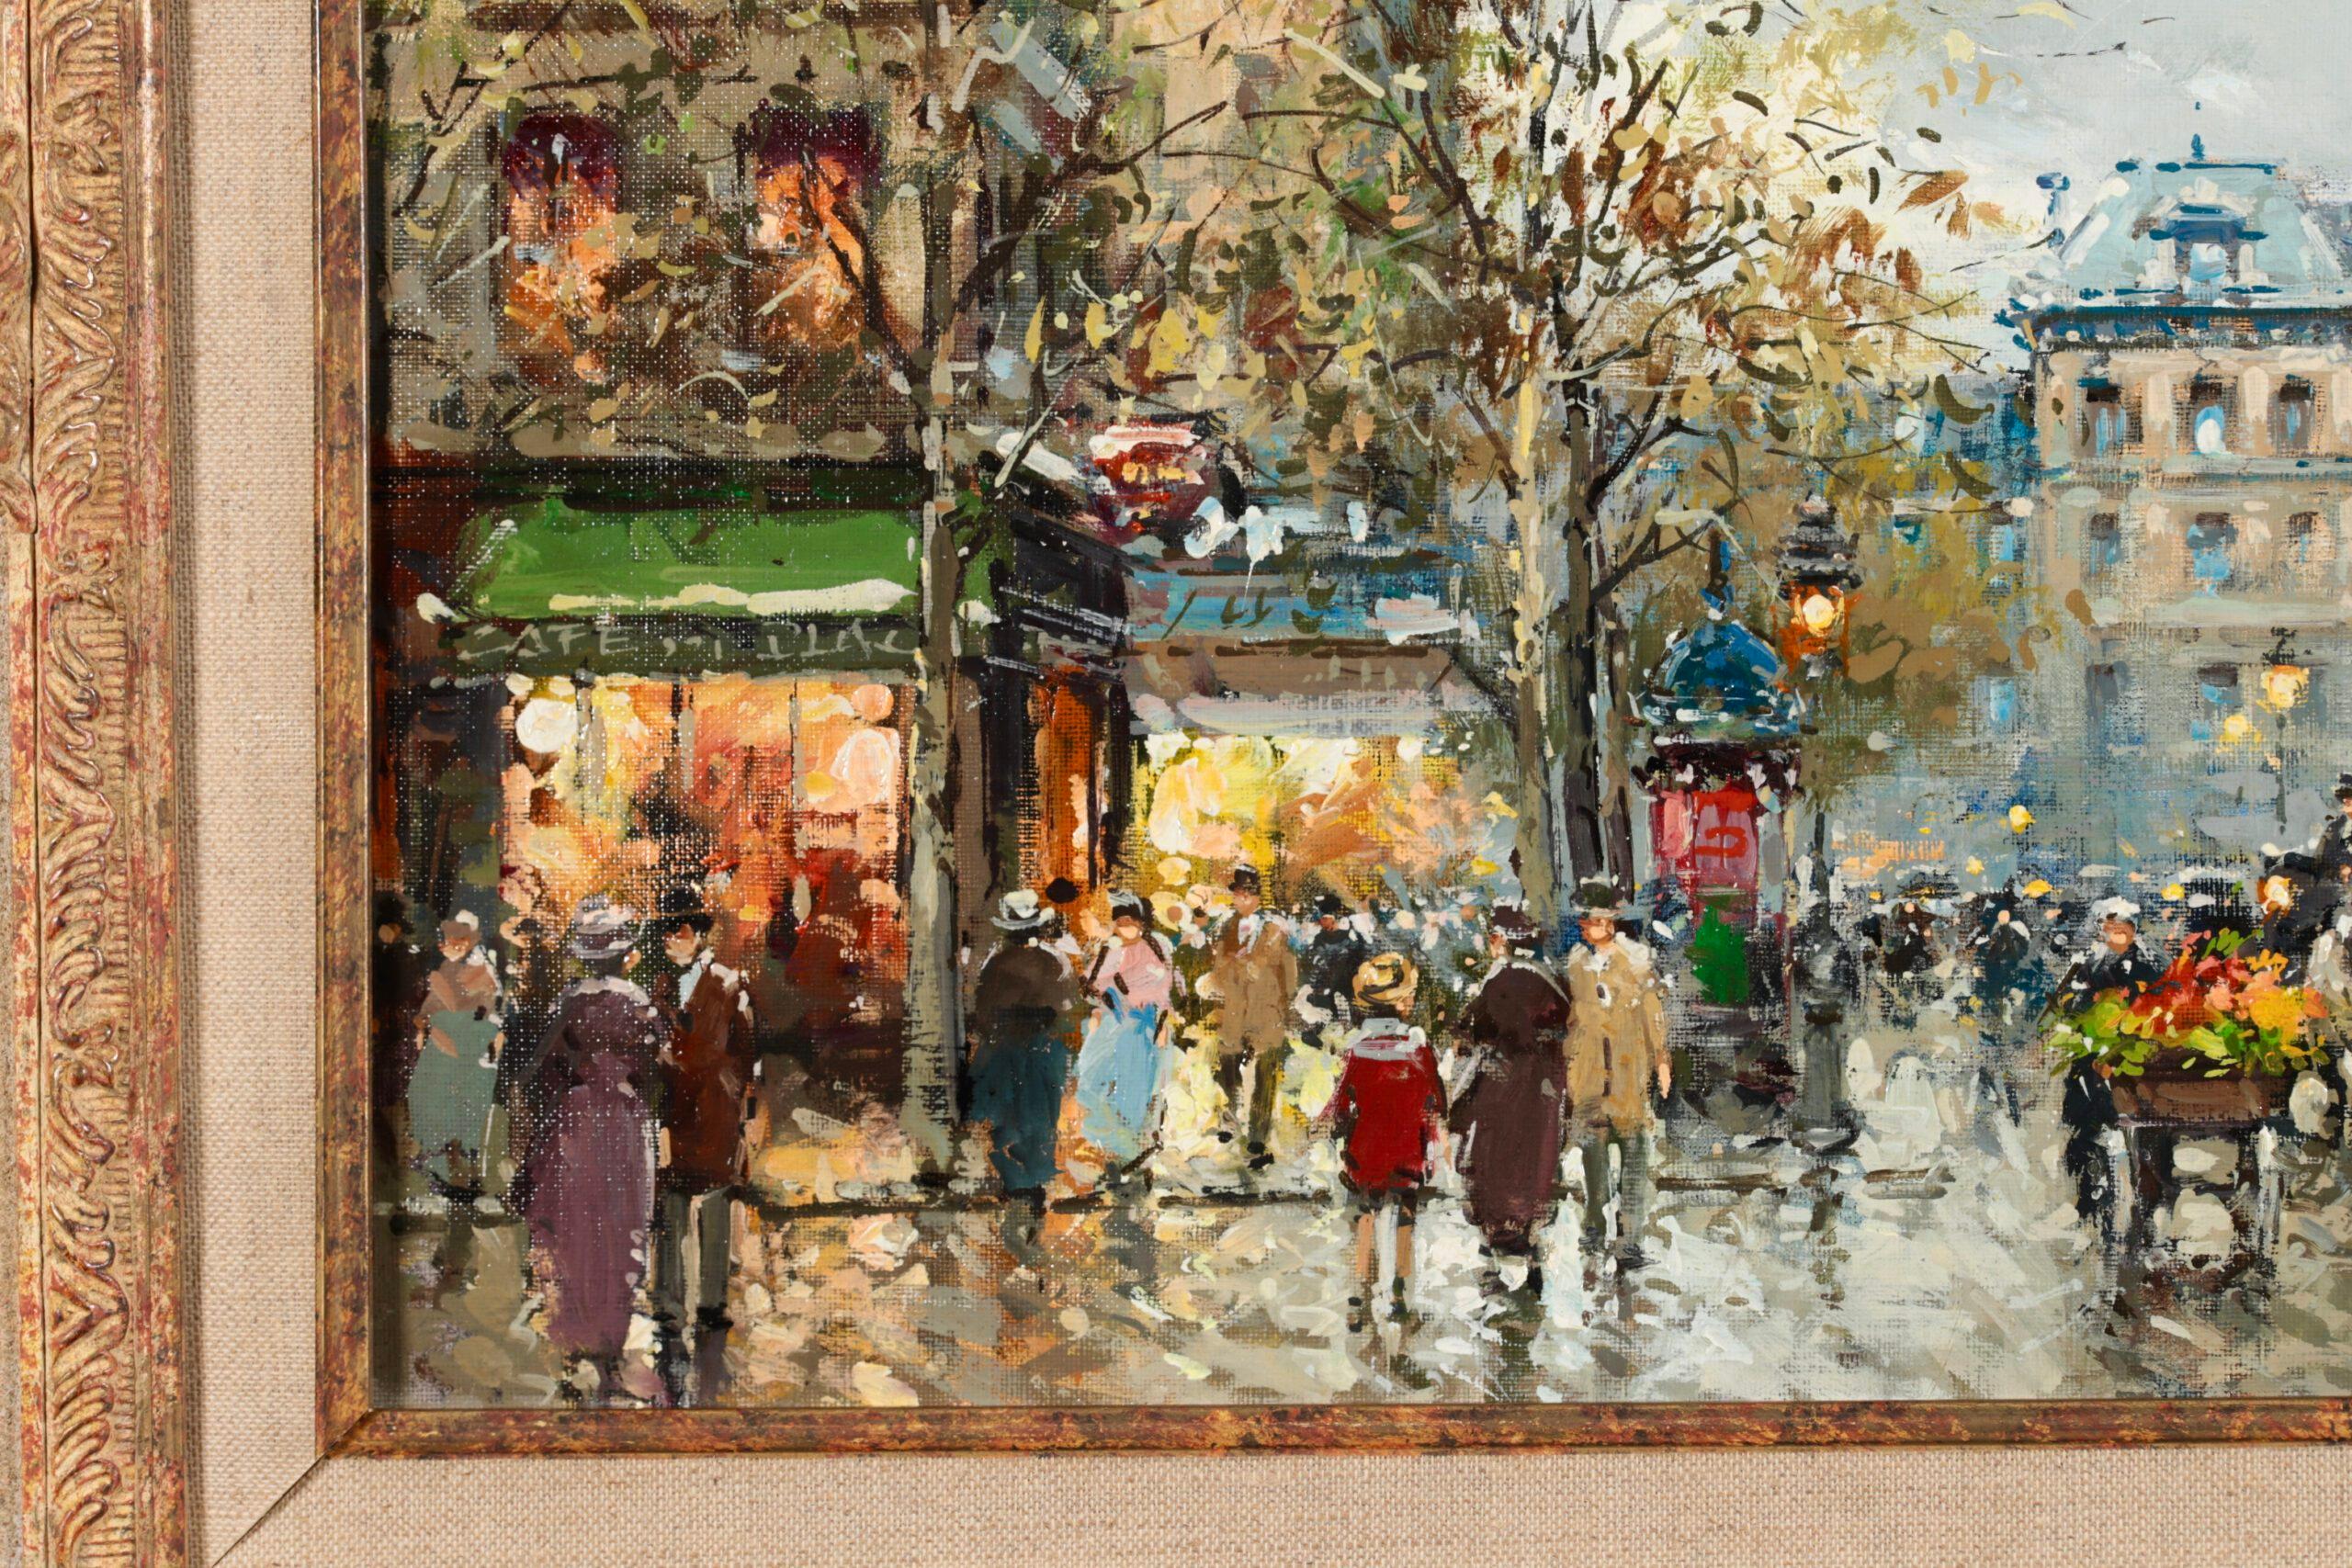 Signed post impressionist figures in cityscape oil on canvas circa 1960 by French painter Antoine Blanchard. The work depicts a bustling scene at Place de la Republique - a square in Paris, France in autumn. The leaves on the trees are turning